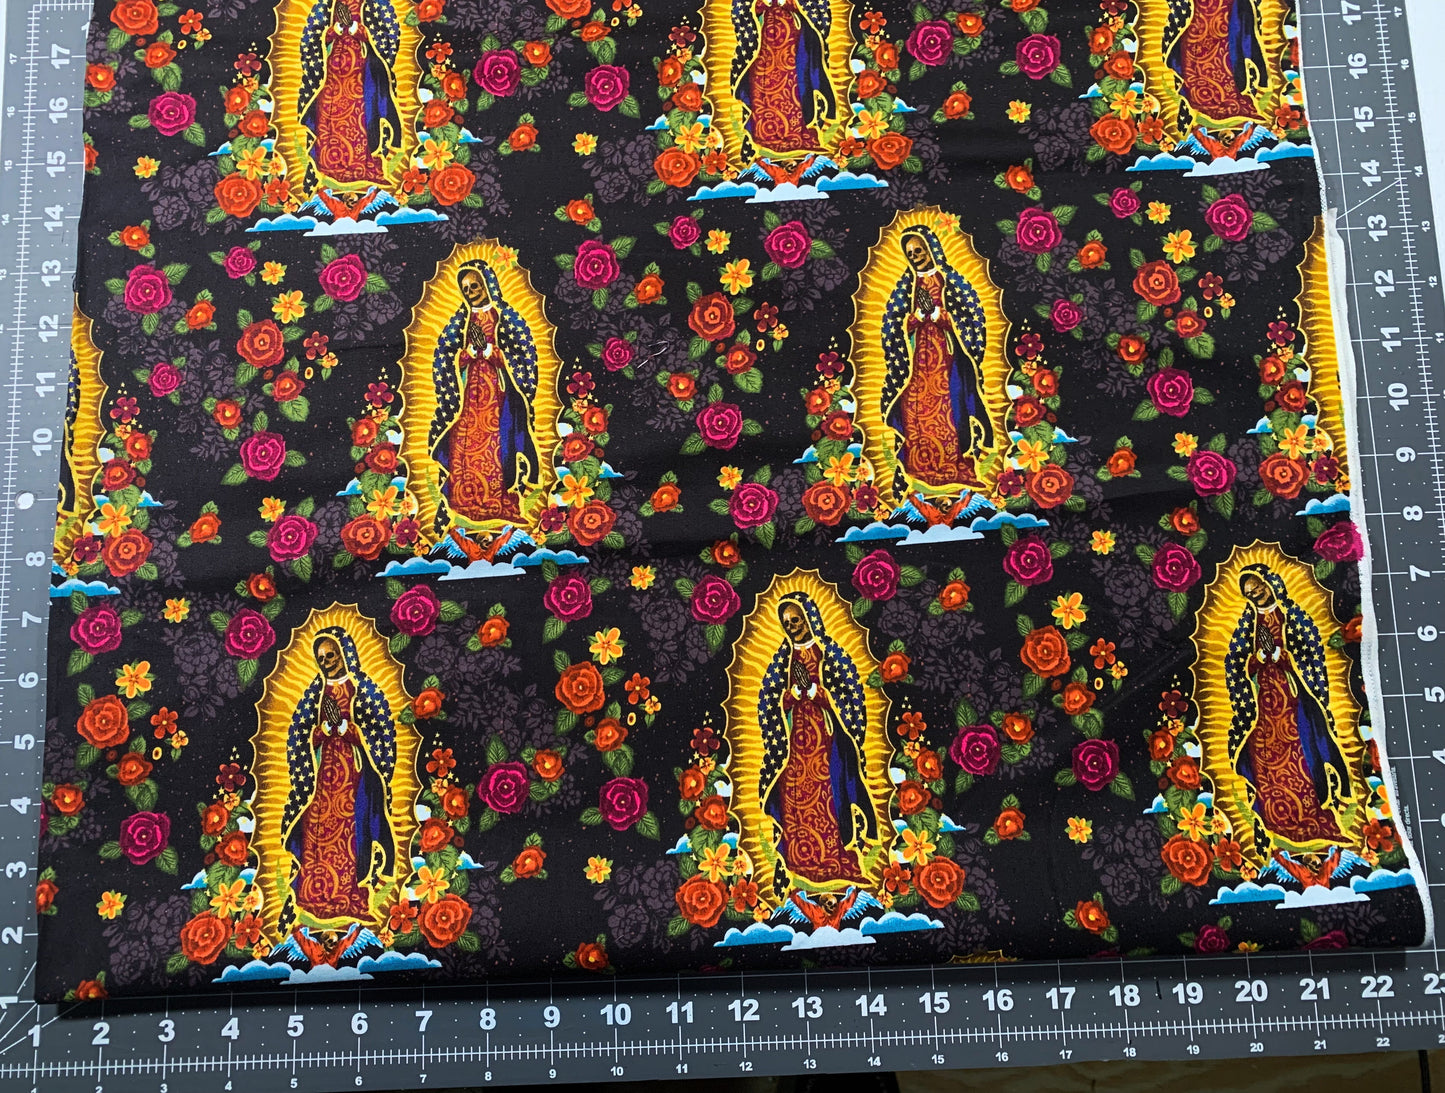 Day of the dead fabric El muerte fabric